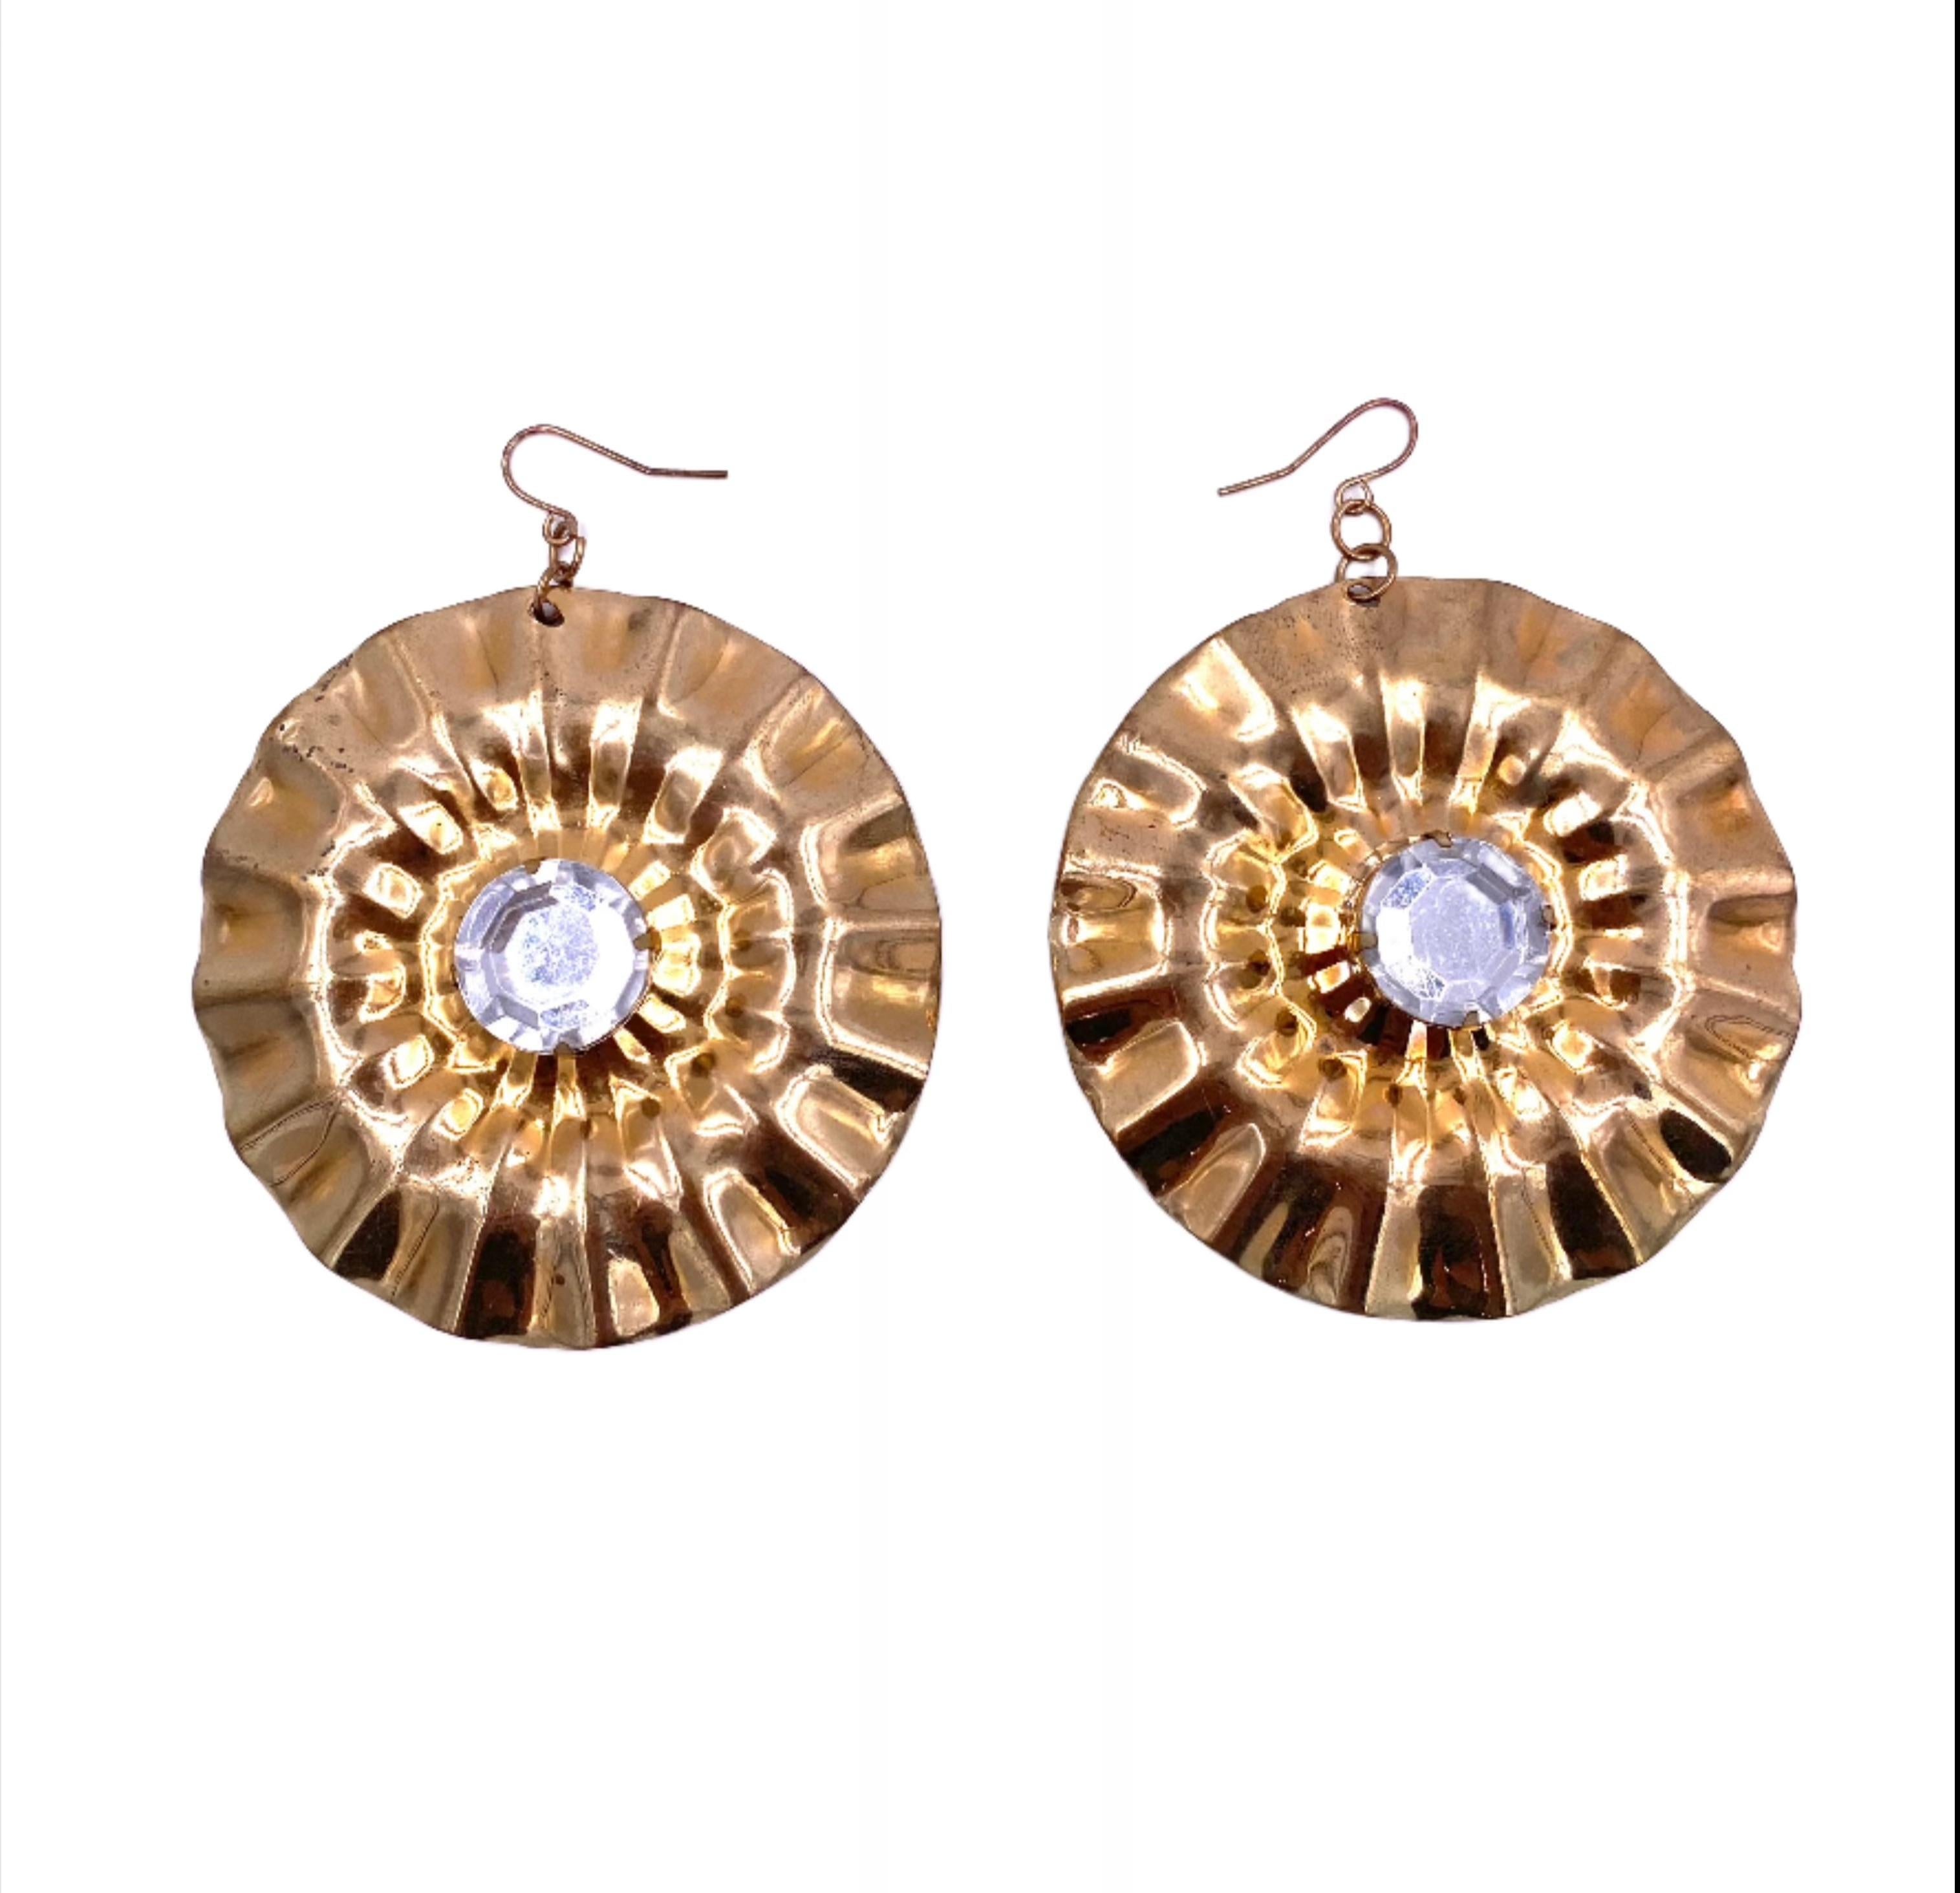 Adorn your ears with opulence and grace with our Vintage Large Round Gold Earrings. The elegant round shape and pinched pie crust texture exude sophistication, while the center crystal adds a touch of glamour. Elevate any outfit with these luxurious